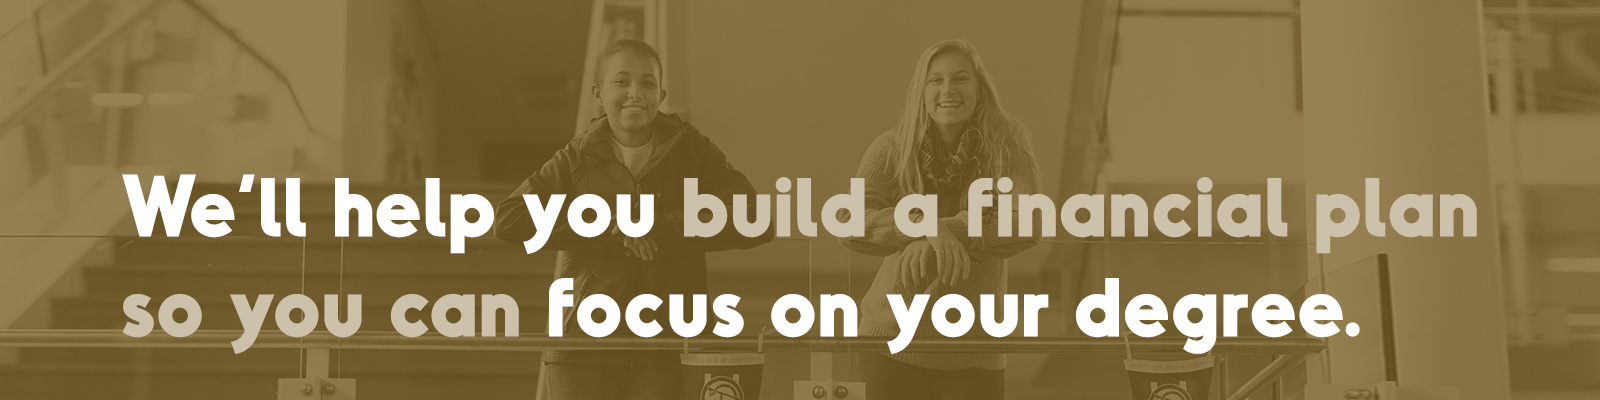 We’ll help you build a financial plan so you can focus on your degree.